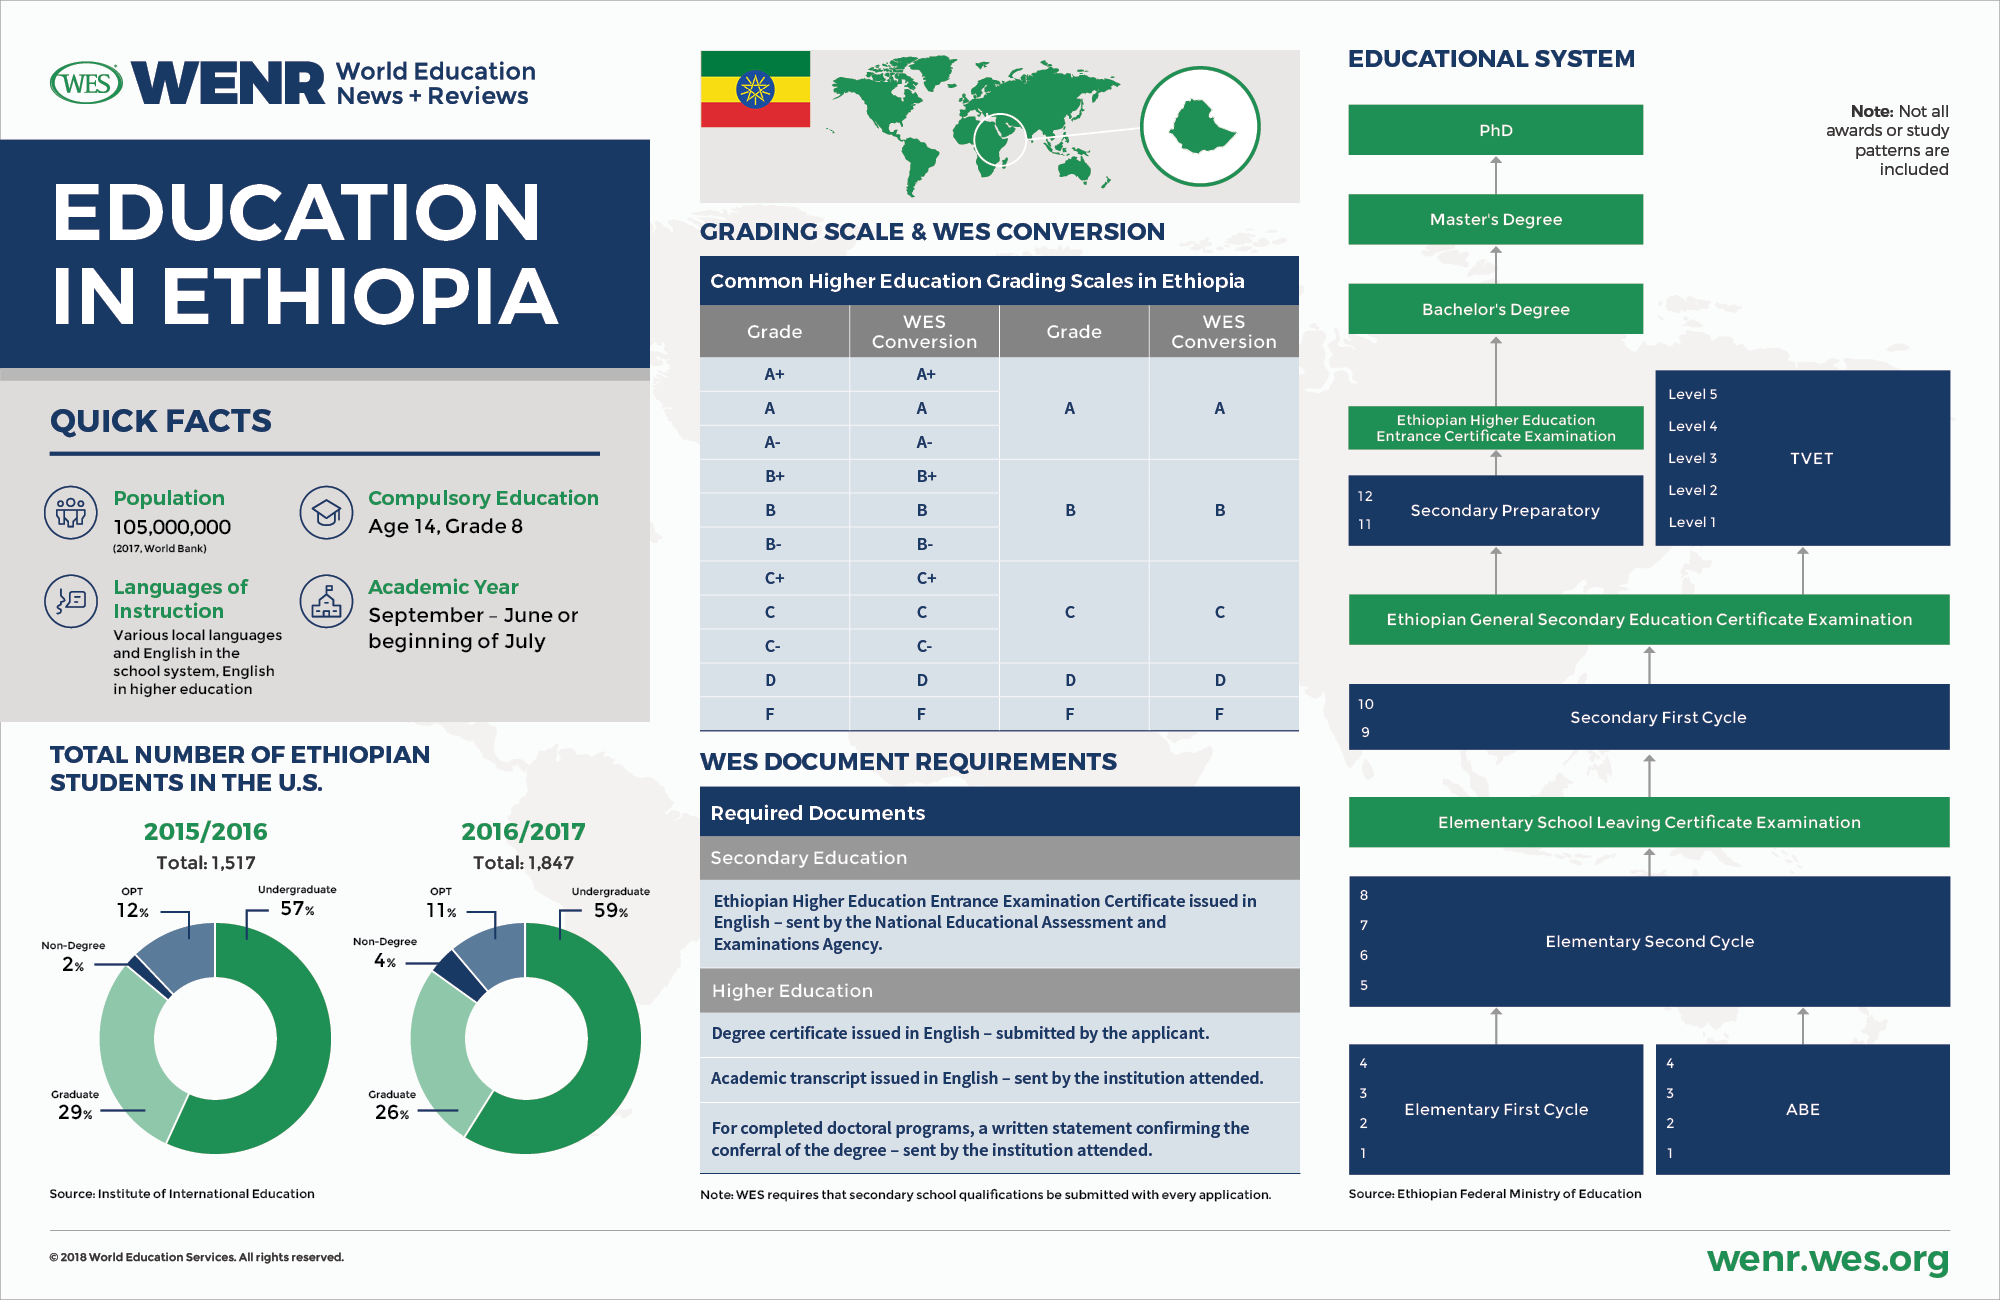 An infographic with fast facts on Ethiopia's educational system and international student mobility landscape. 